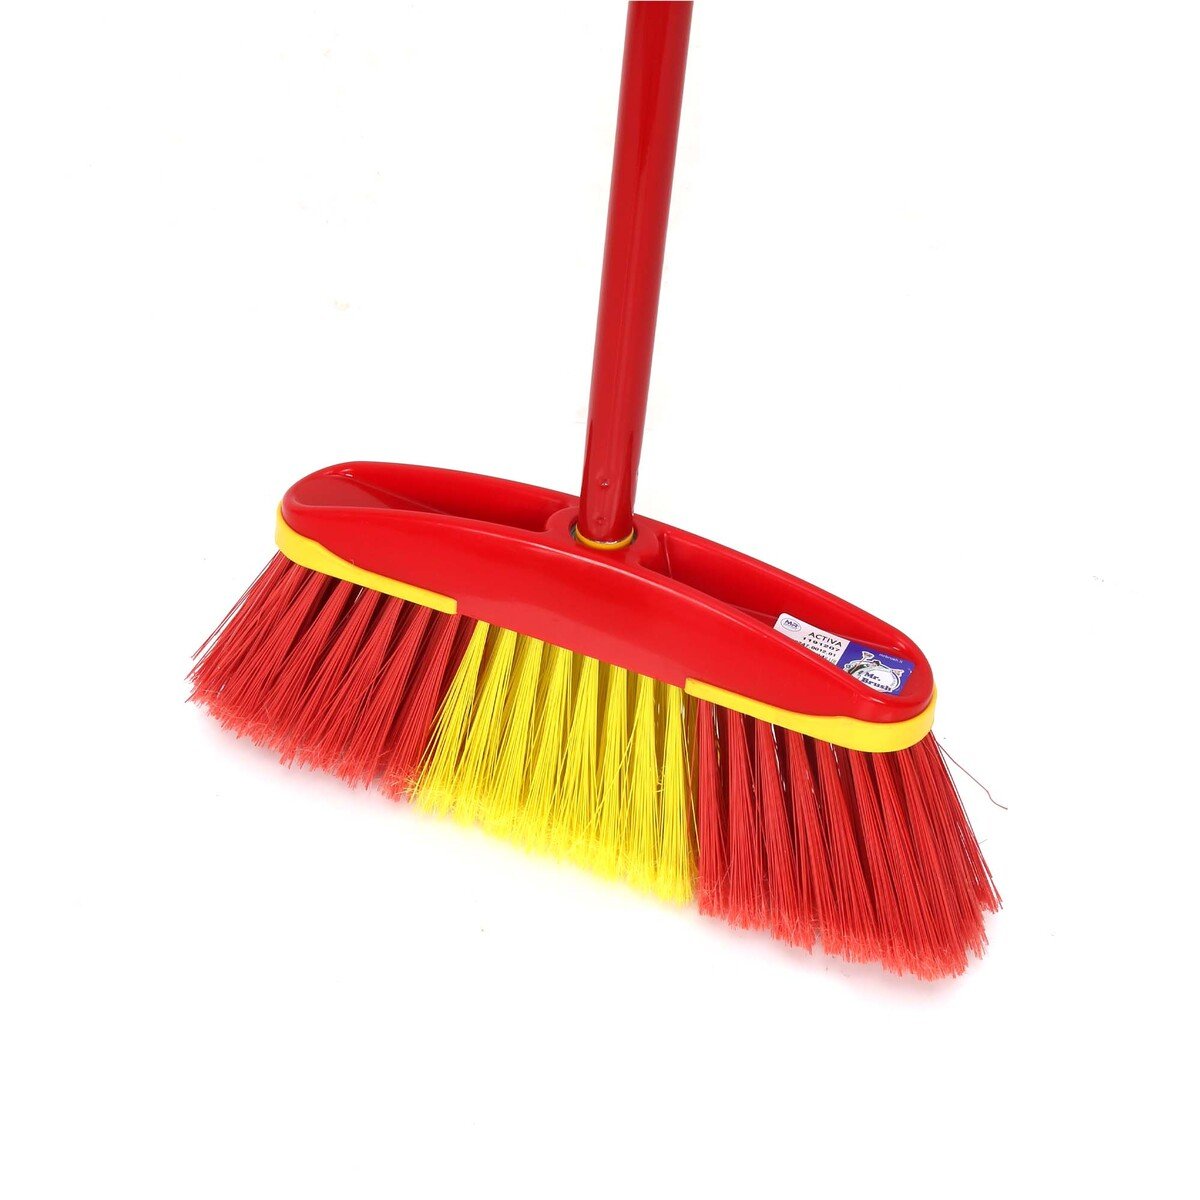 Mr.Brush 01000460012 active Soft Broom with long Stick, Assorted colors